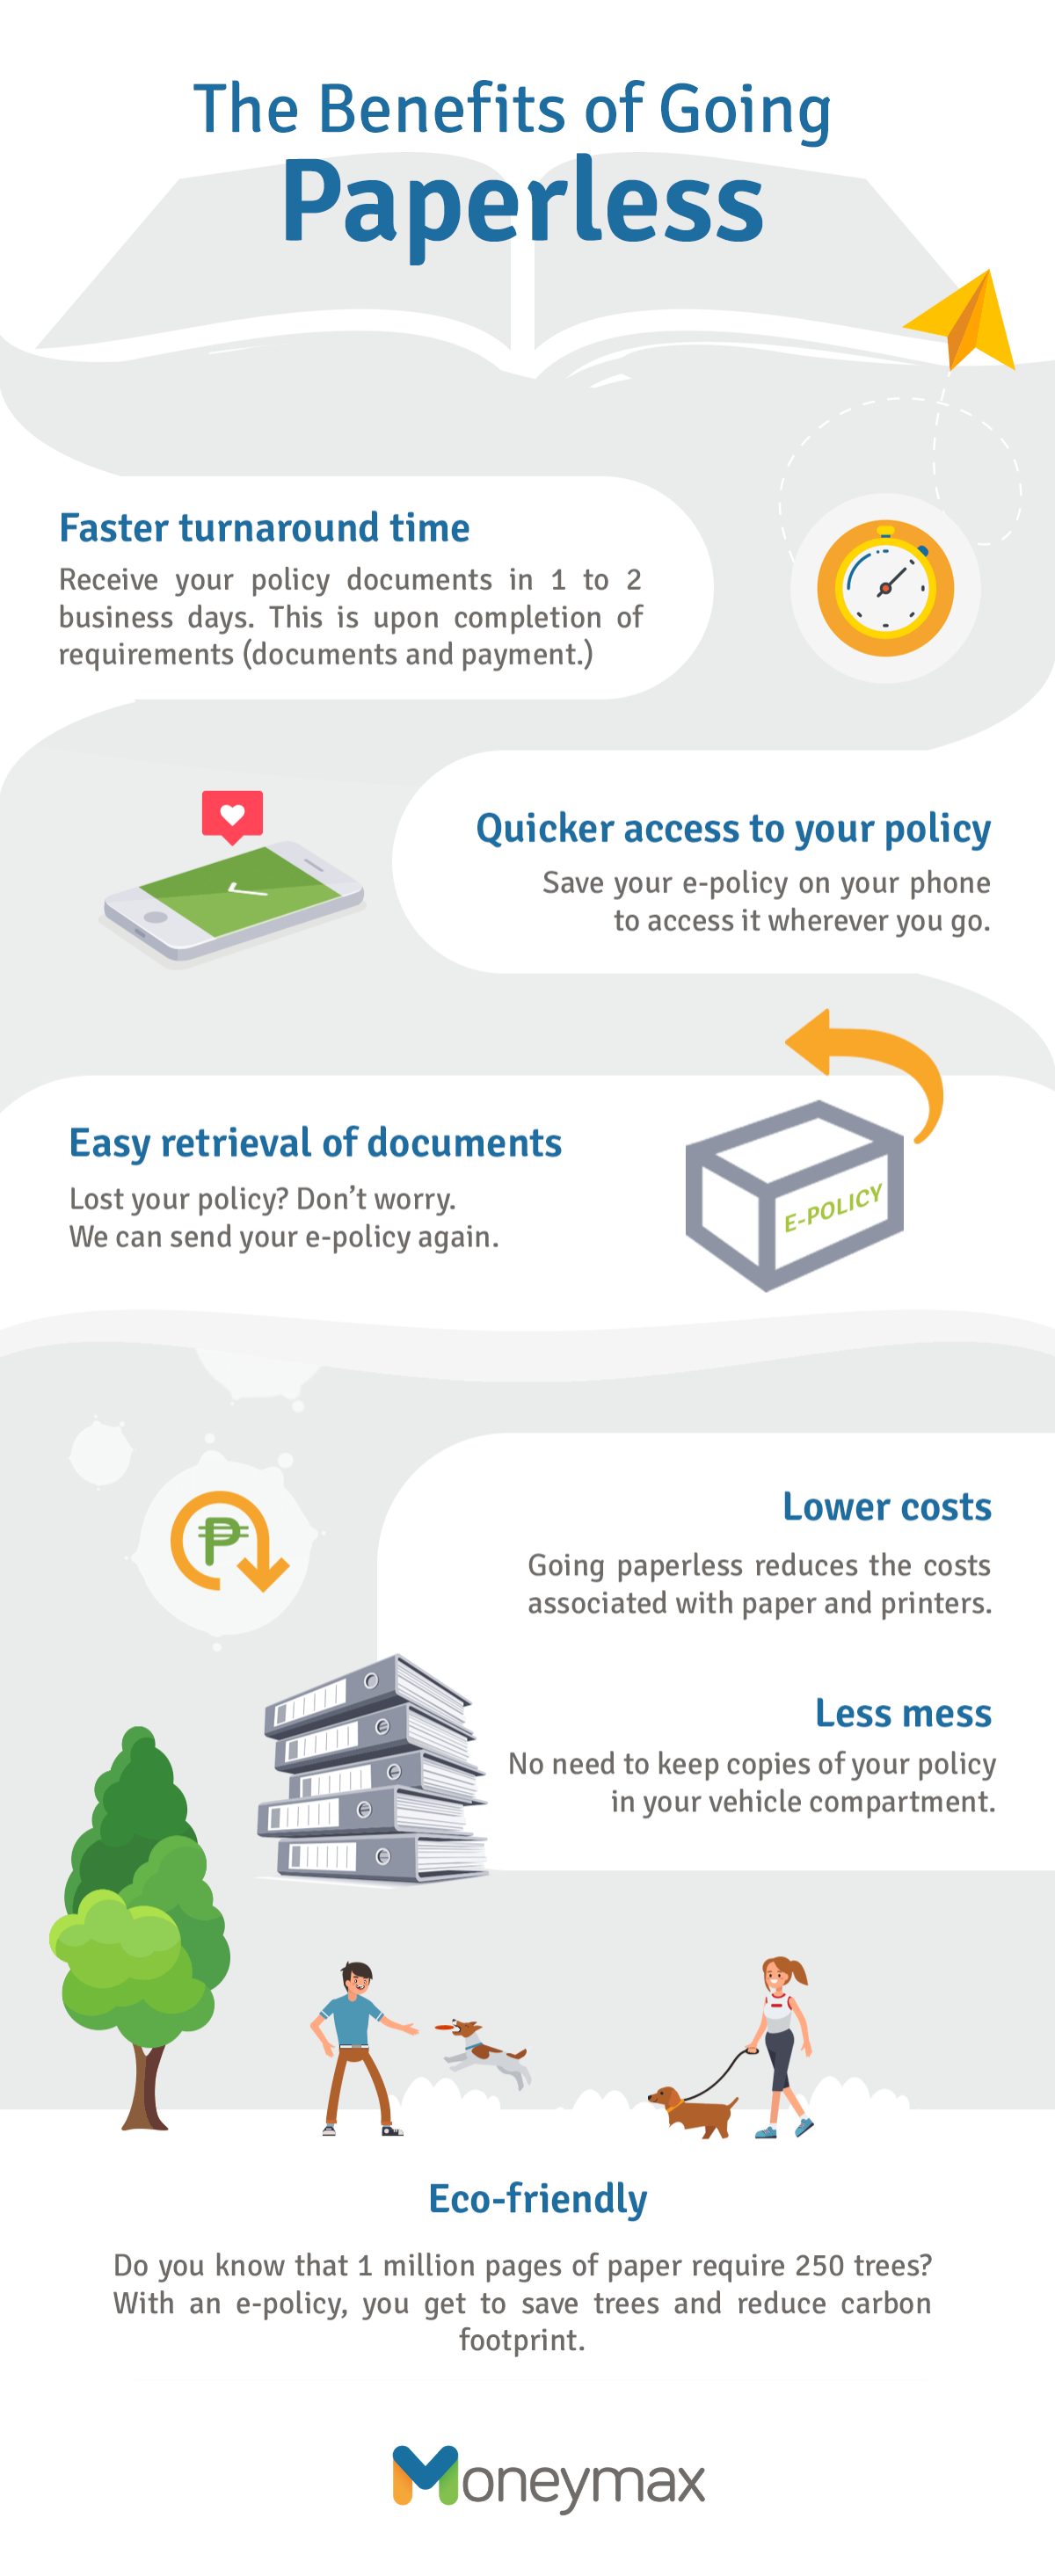 The Benefits of Going Paperless with Moneymax